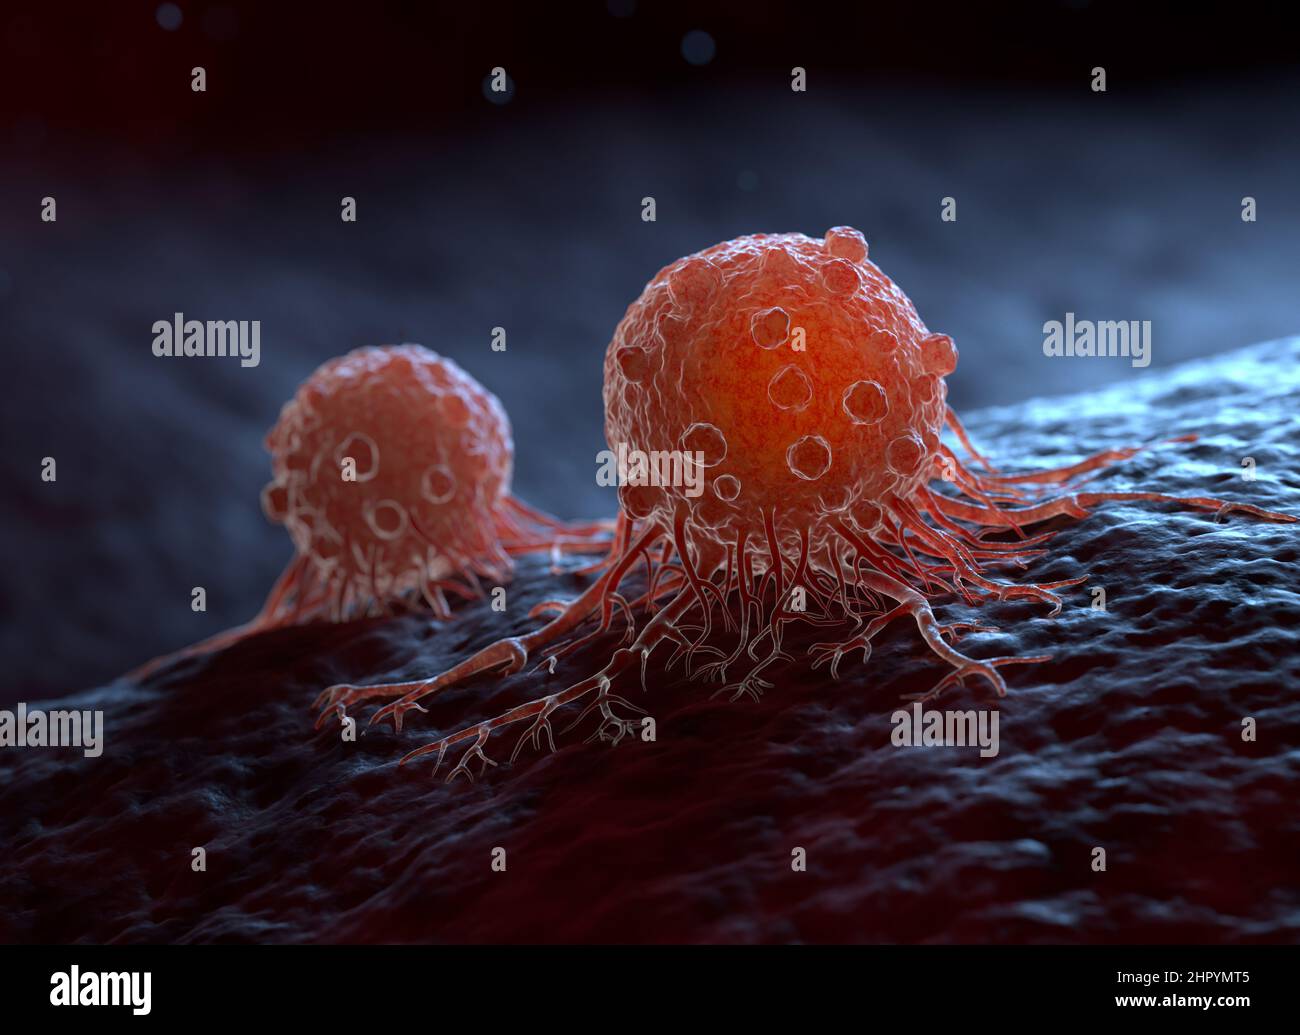 Cancer cells can migrate to other body tissues or organs building metastasis. 3D illustration Stock Photo